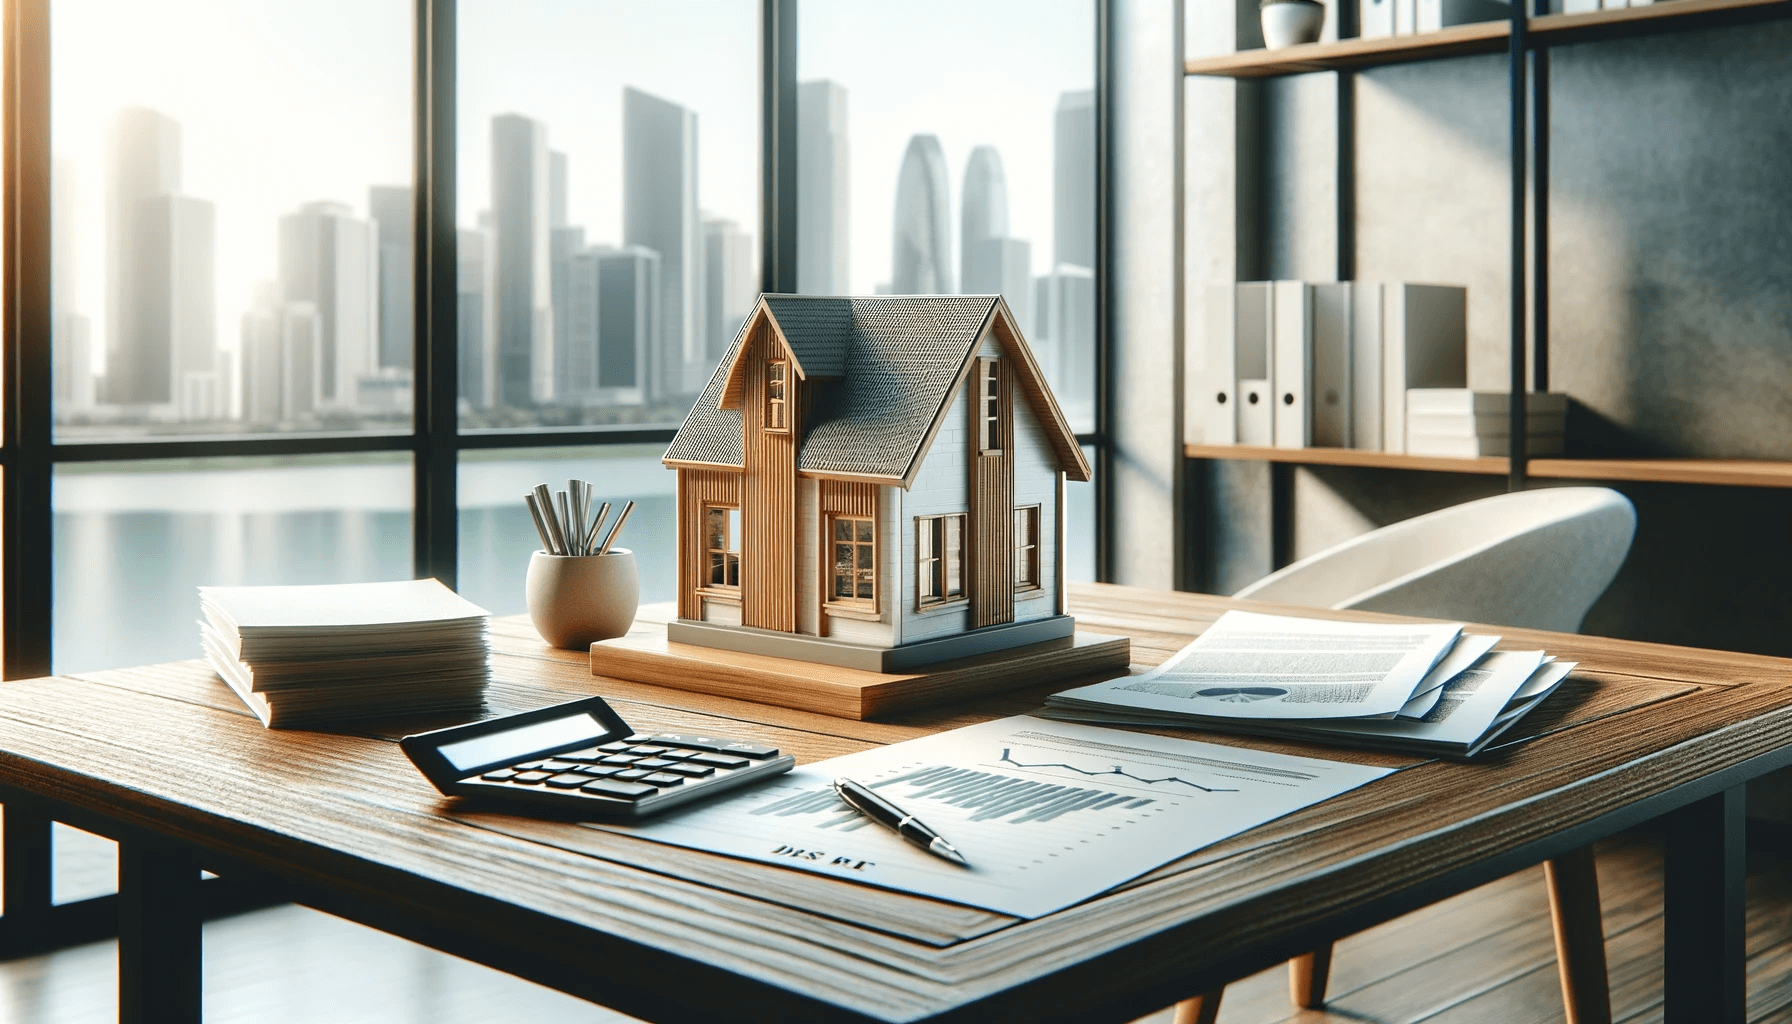 Picture of a mini house on a desk with a calculator, paperwork, and pens